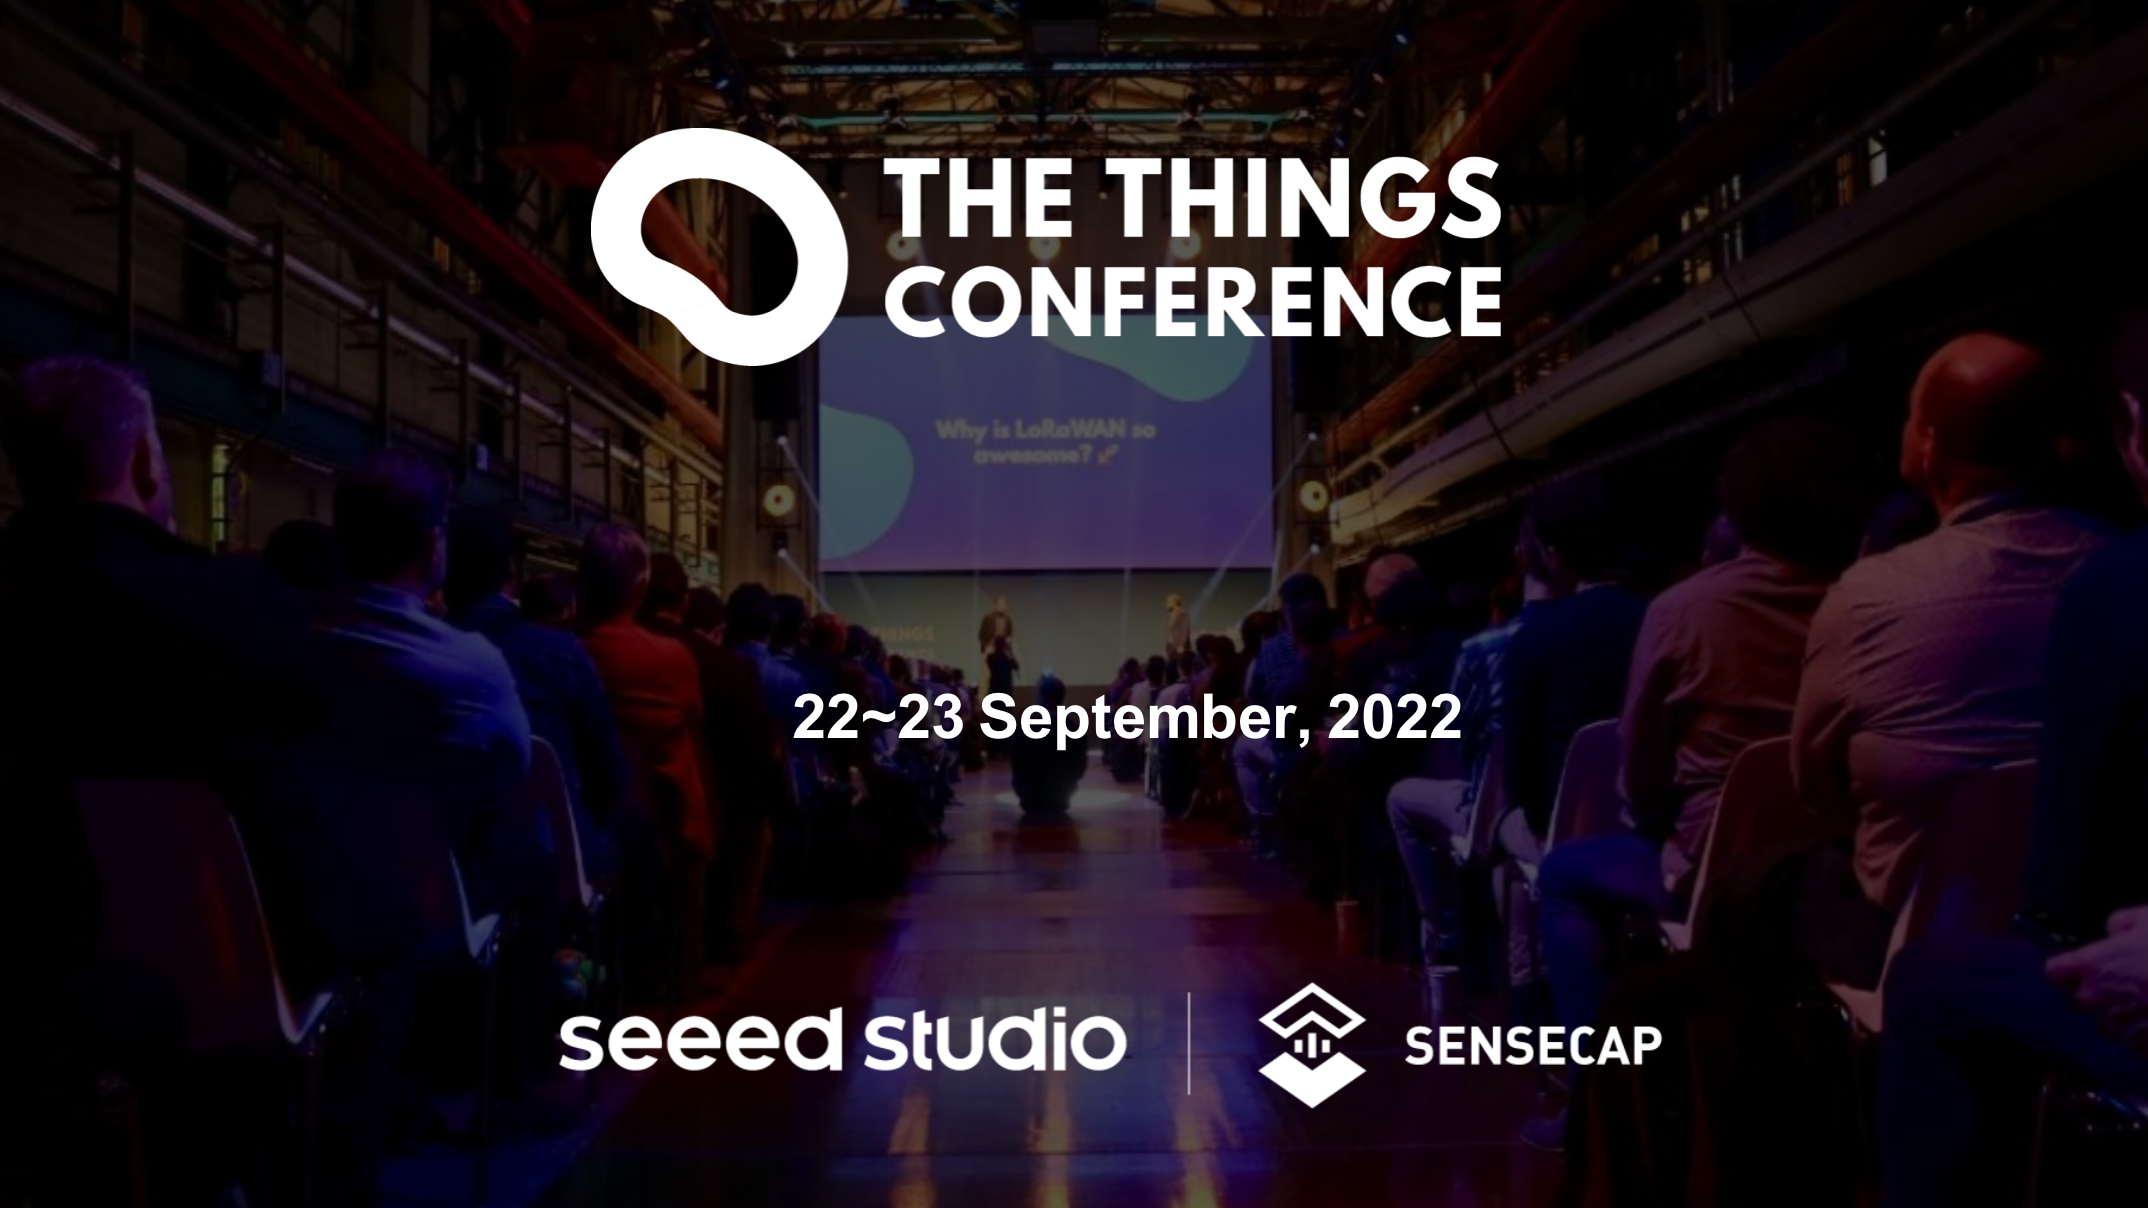 Come and Meet Us at The Things Conference 2022! Latest Open Tech From